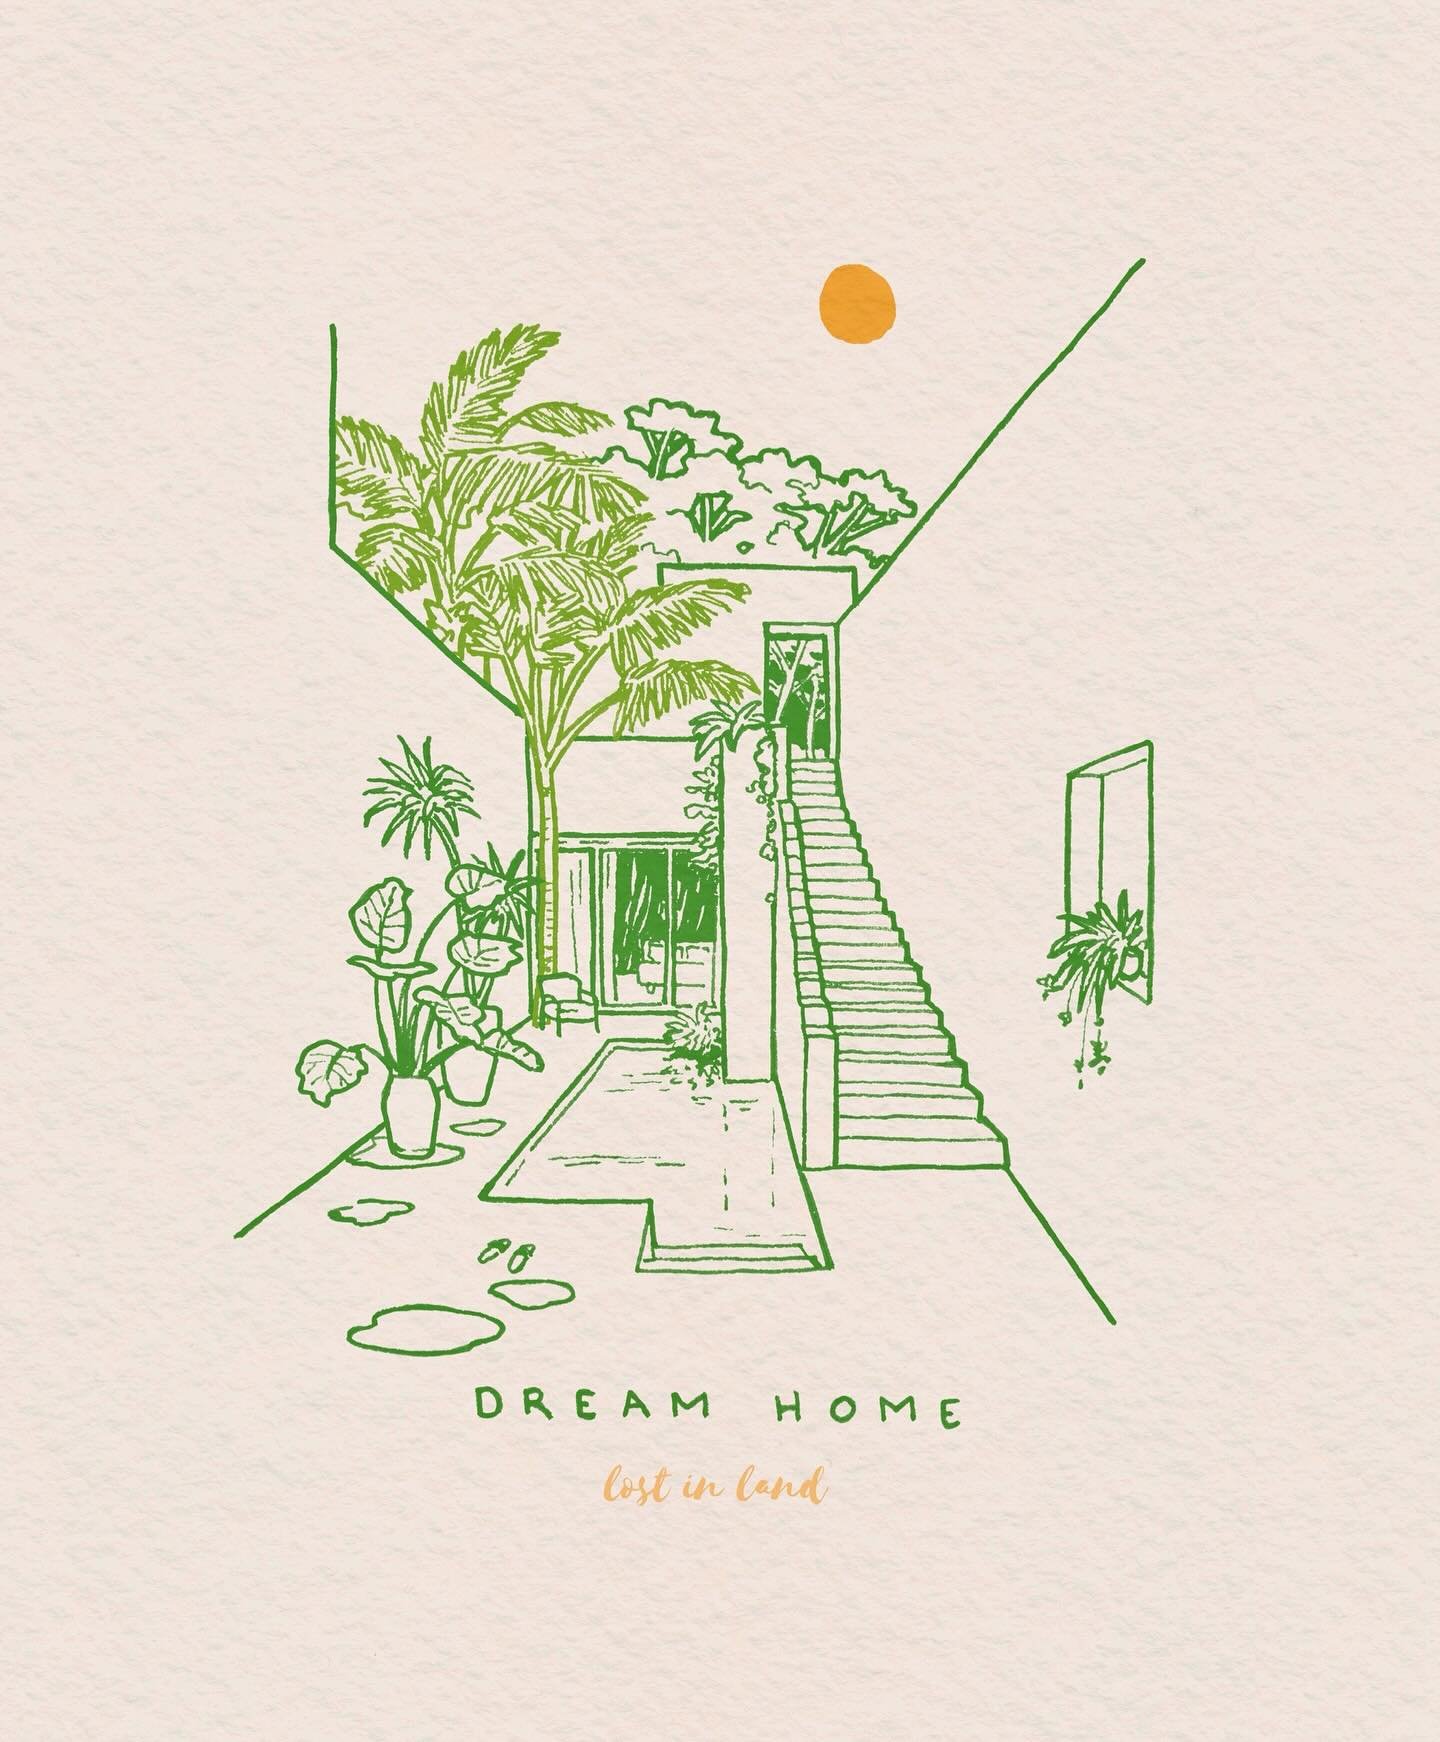 DREAM HOME

My favorite ritual of Sunday : creating little doodles. 
I love minimalist architectural homes mixed with tropical plants. A small space can the perfect place to escape from the urban chaos. That is my idea of a perfect home anyway. 

The